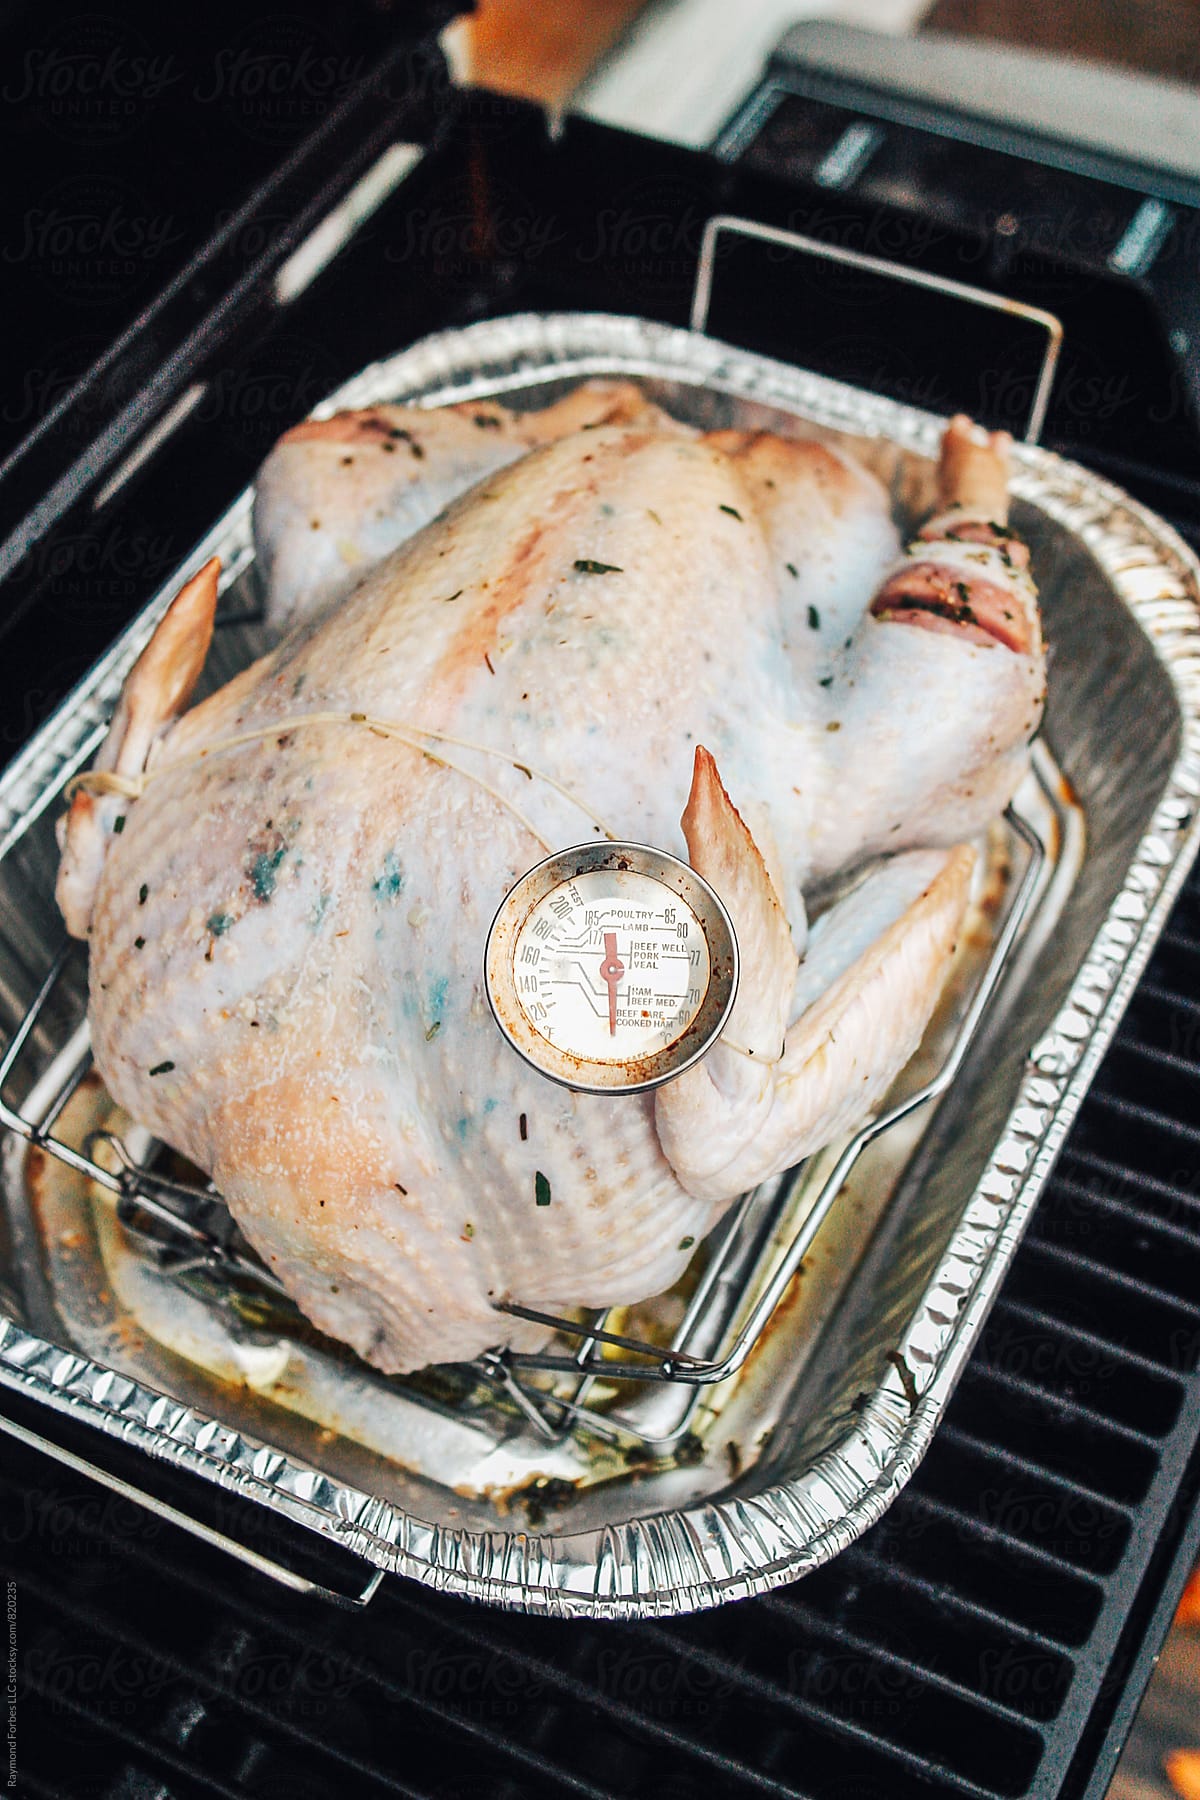 Hot Oil Turkey Fry For Thanksgiving With Temperature Gauge by Stocksy  Contributor Raymond Forbes LLC - Stocksy